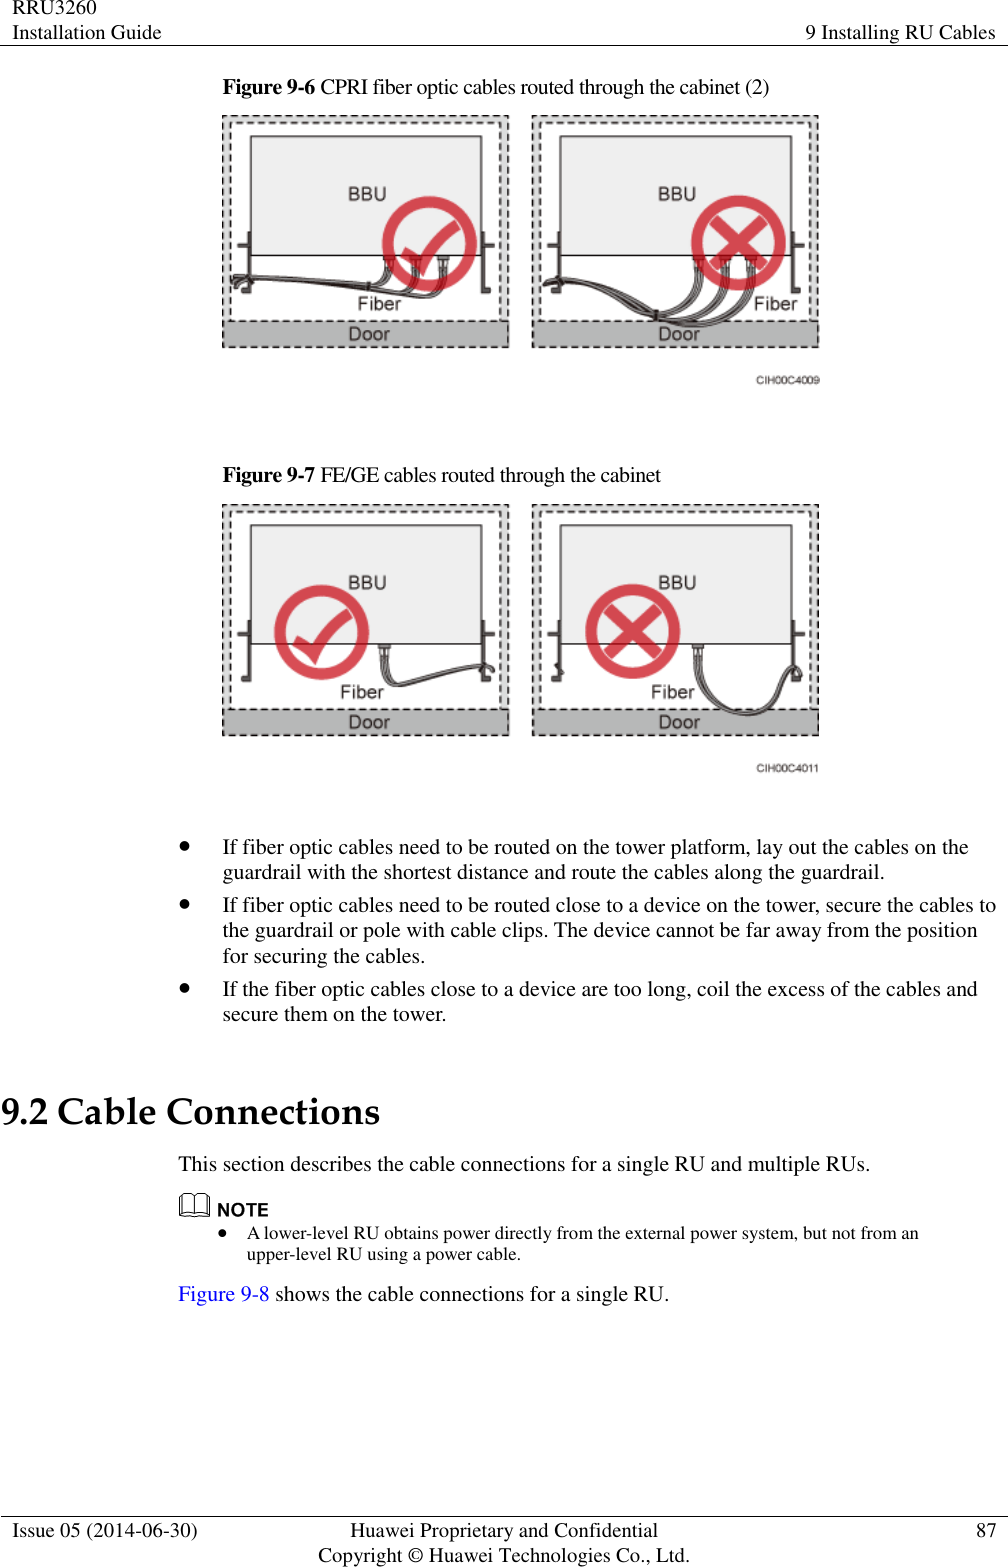 RRU3260 Installation Guide 9 Installing RU Cables  Issue 05 (2014-06-30) Huawei Proprietary and Confidential                                     Copyright © Huawei Technologies Co., Ltd. 87  Figure 9-6 CPRI fiber optic cables routed through the cabinet (2)   Figure 9-7 FE/GE cables routed through the cabinet    If fiber optic cables need to be routed on the tower platform, lay out the cables on the guardrail with the shortest distance and route the cables along the guardrail.  If fiber optic cables need to be routed close to a device on the tower, secure the cables to the guardrail or pole with cable clips. The device cannot be far away from the position for securing the cables.  If the fiber optic cables close to a device are too long, coil the excess of the cables and secure them on the tower. 9.2 Cable Connections This section describes the cable connections for a single RU and multiple RUs.   A lower-level RU obtains power directly from the external power system, but not from an upper-level RU using a power cable. Figure 9-8 shows the cable connections for a single RU. 